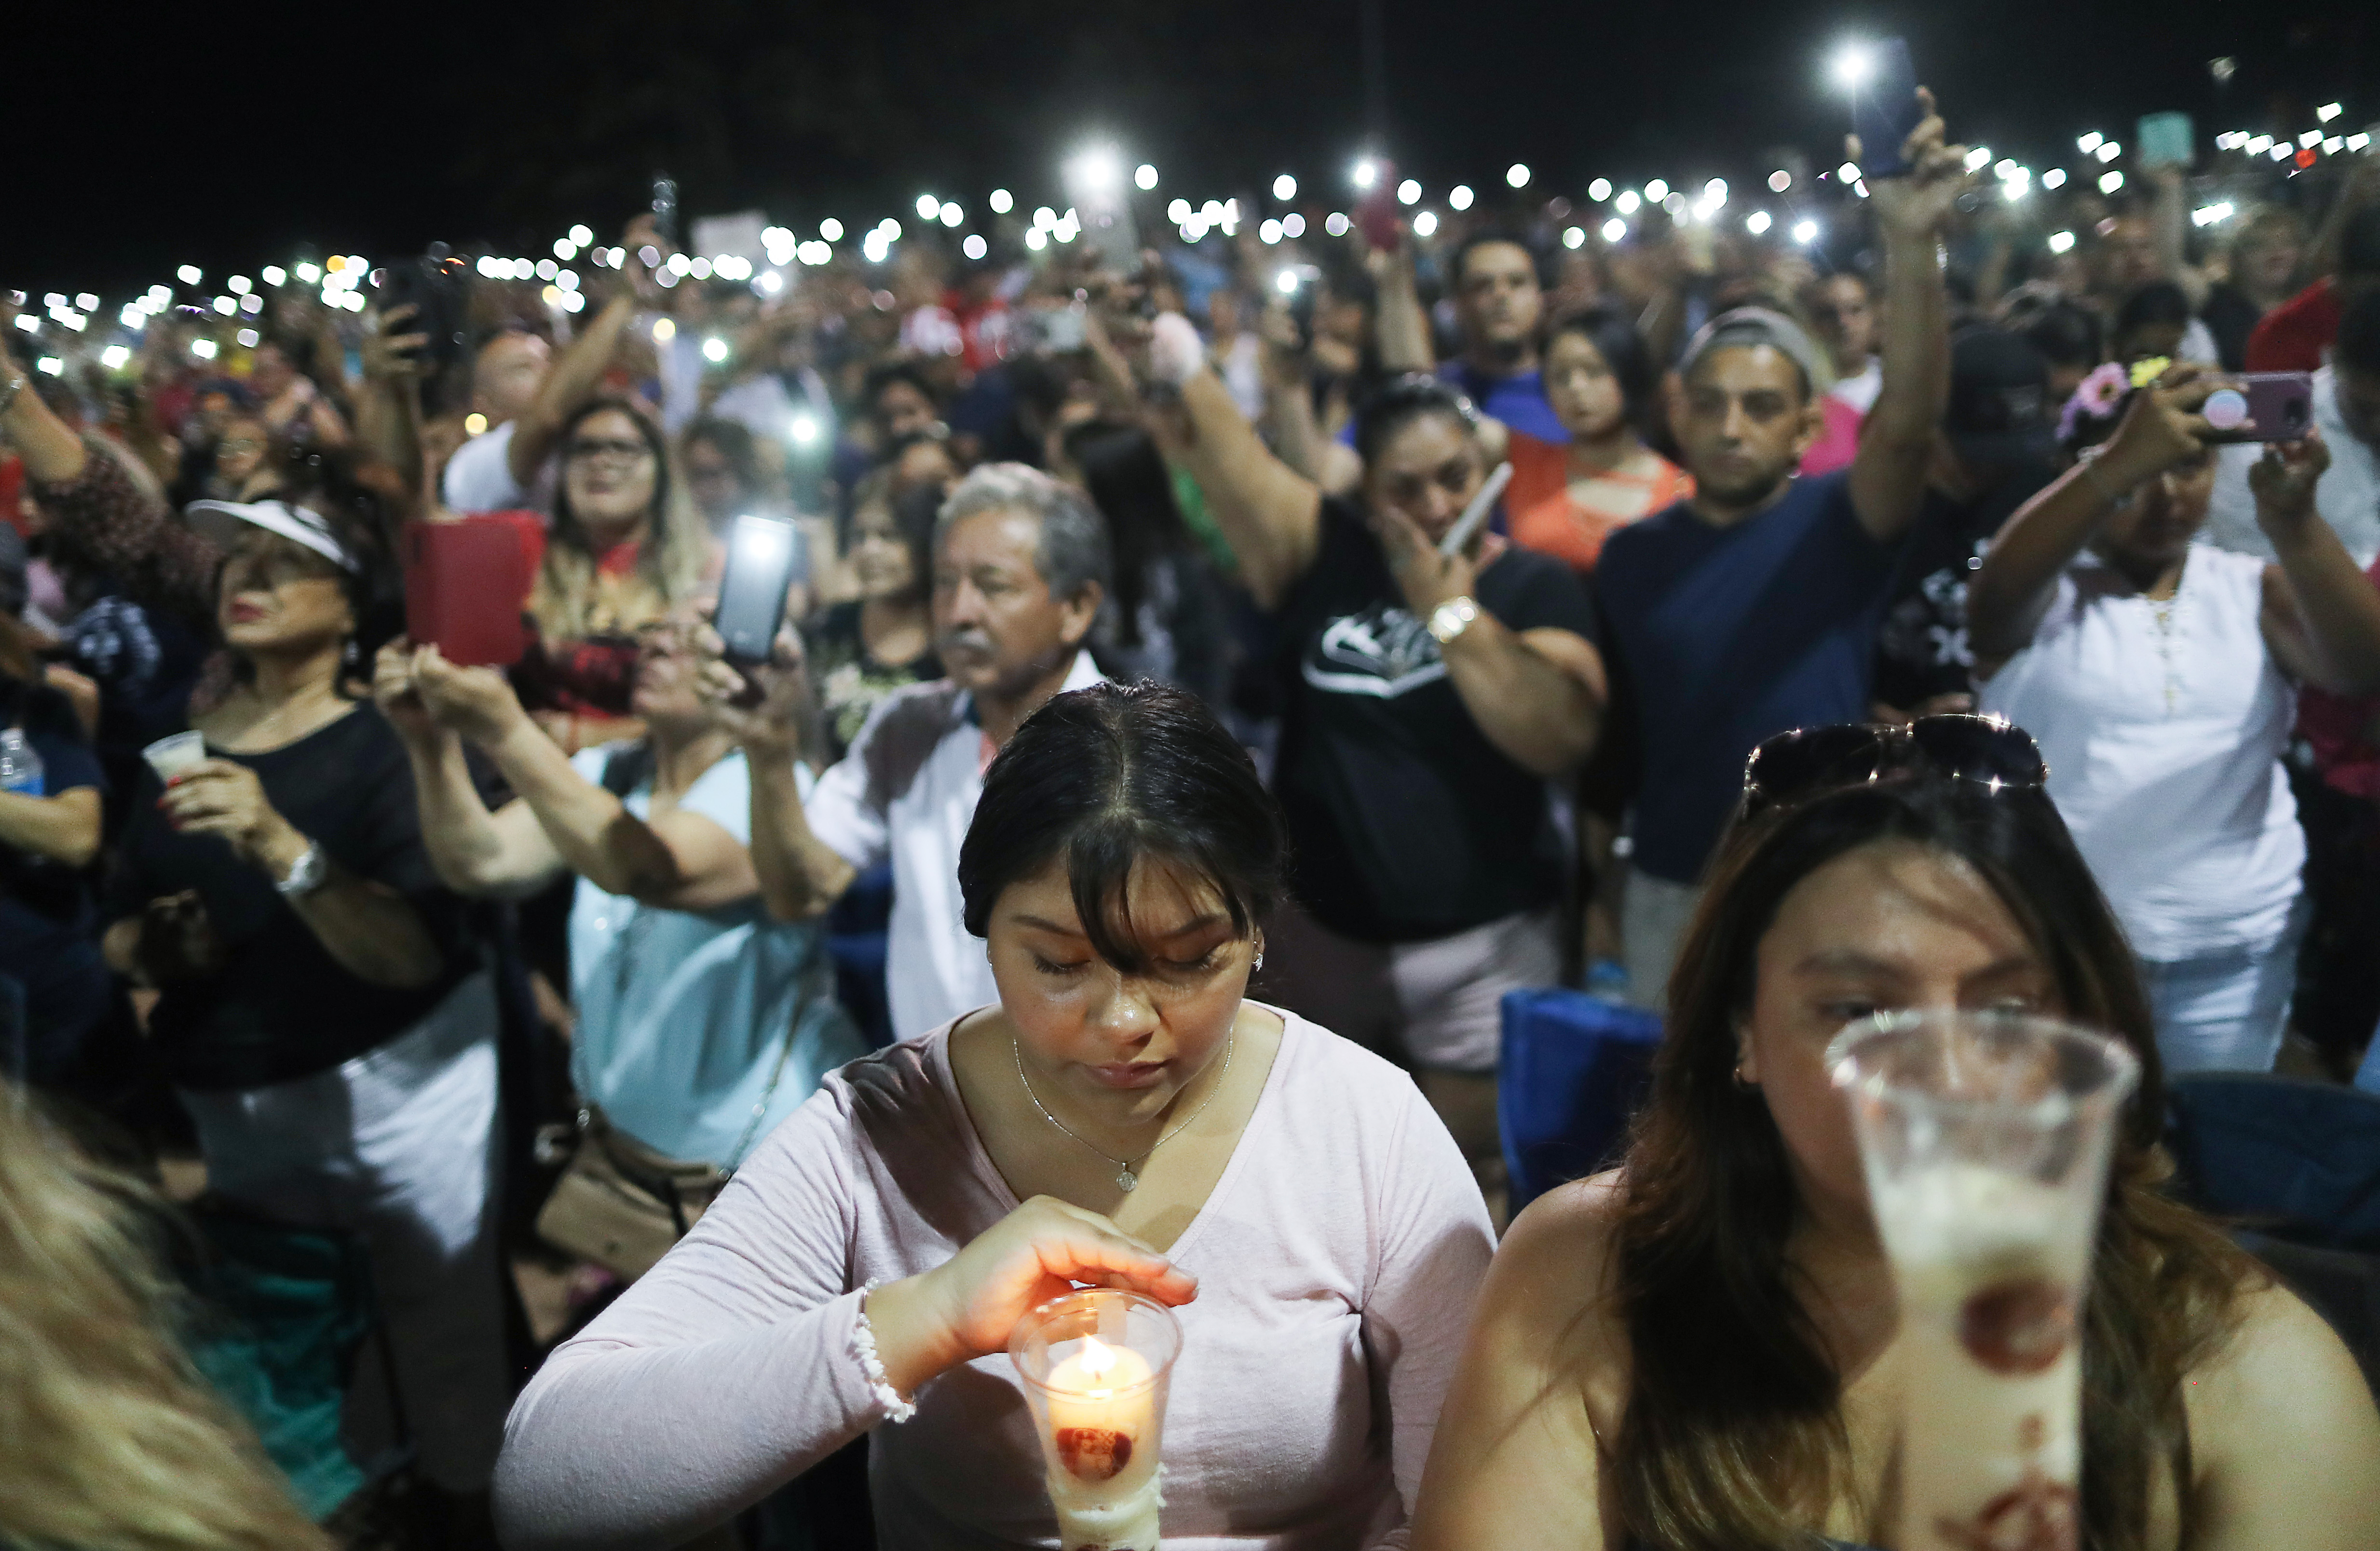 A large group of El Paso residents gather for a candlelight vigil.